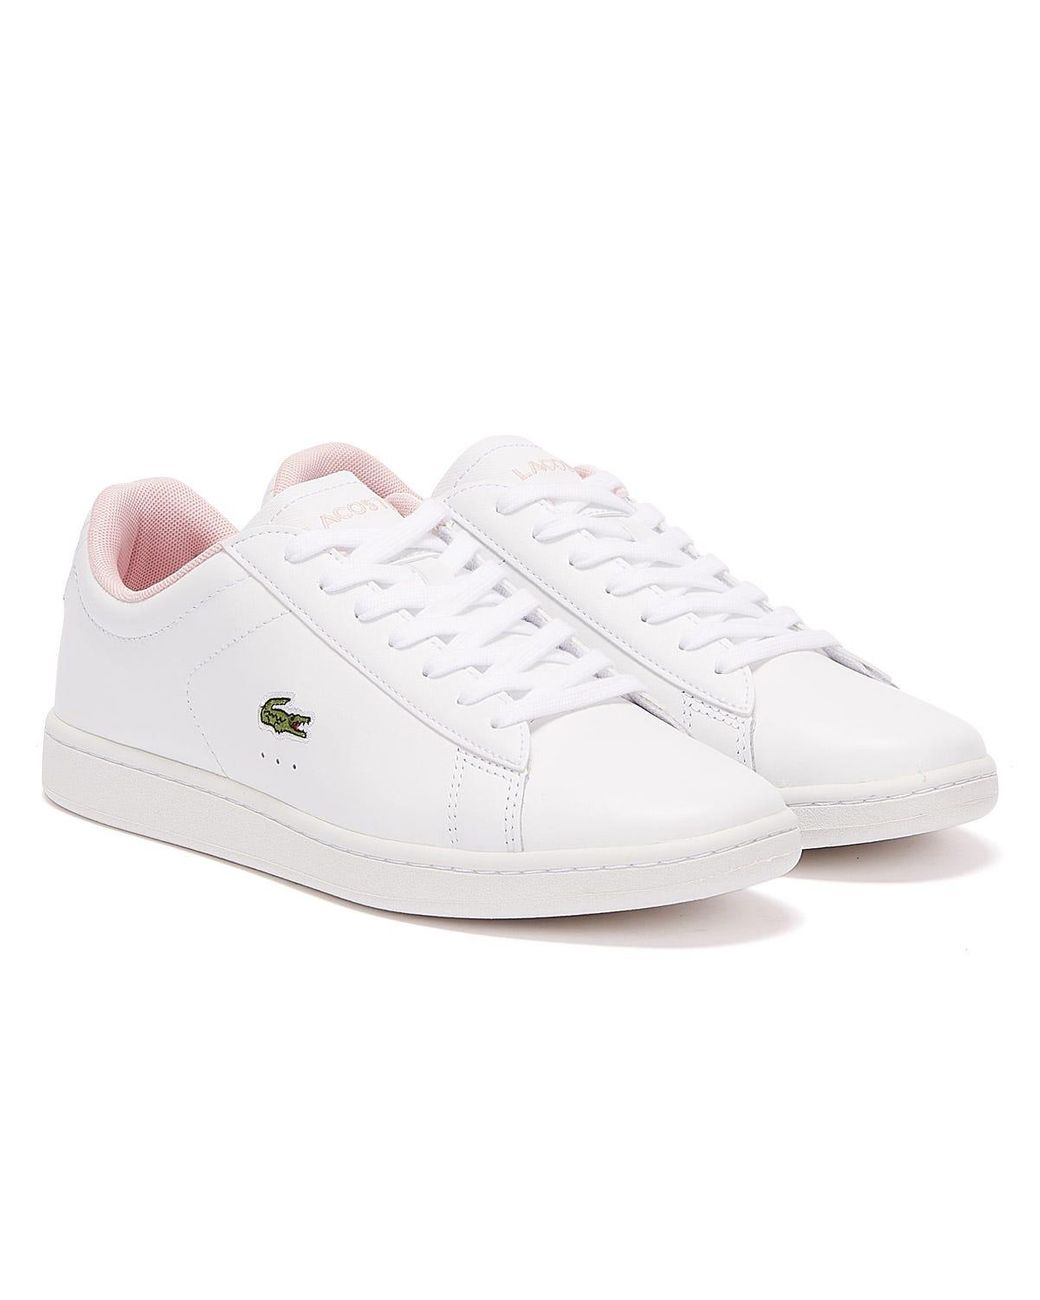 lacoste carnaby evo white pink